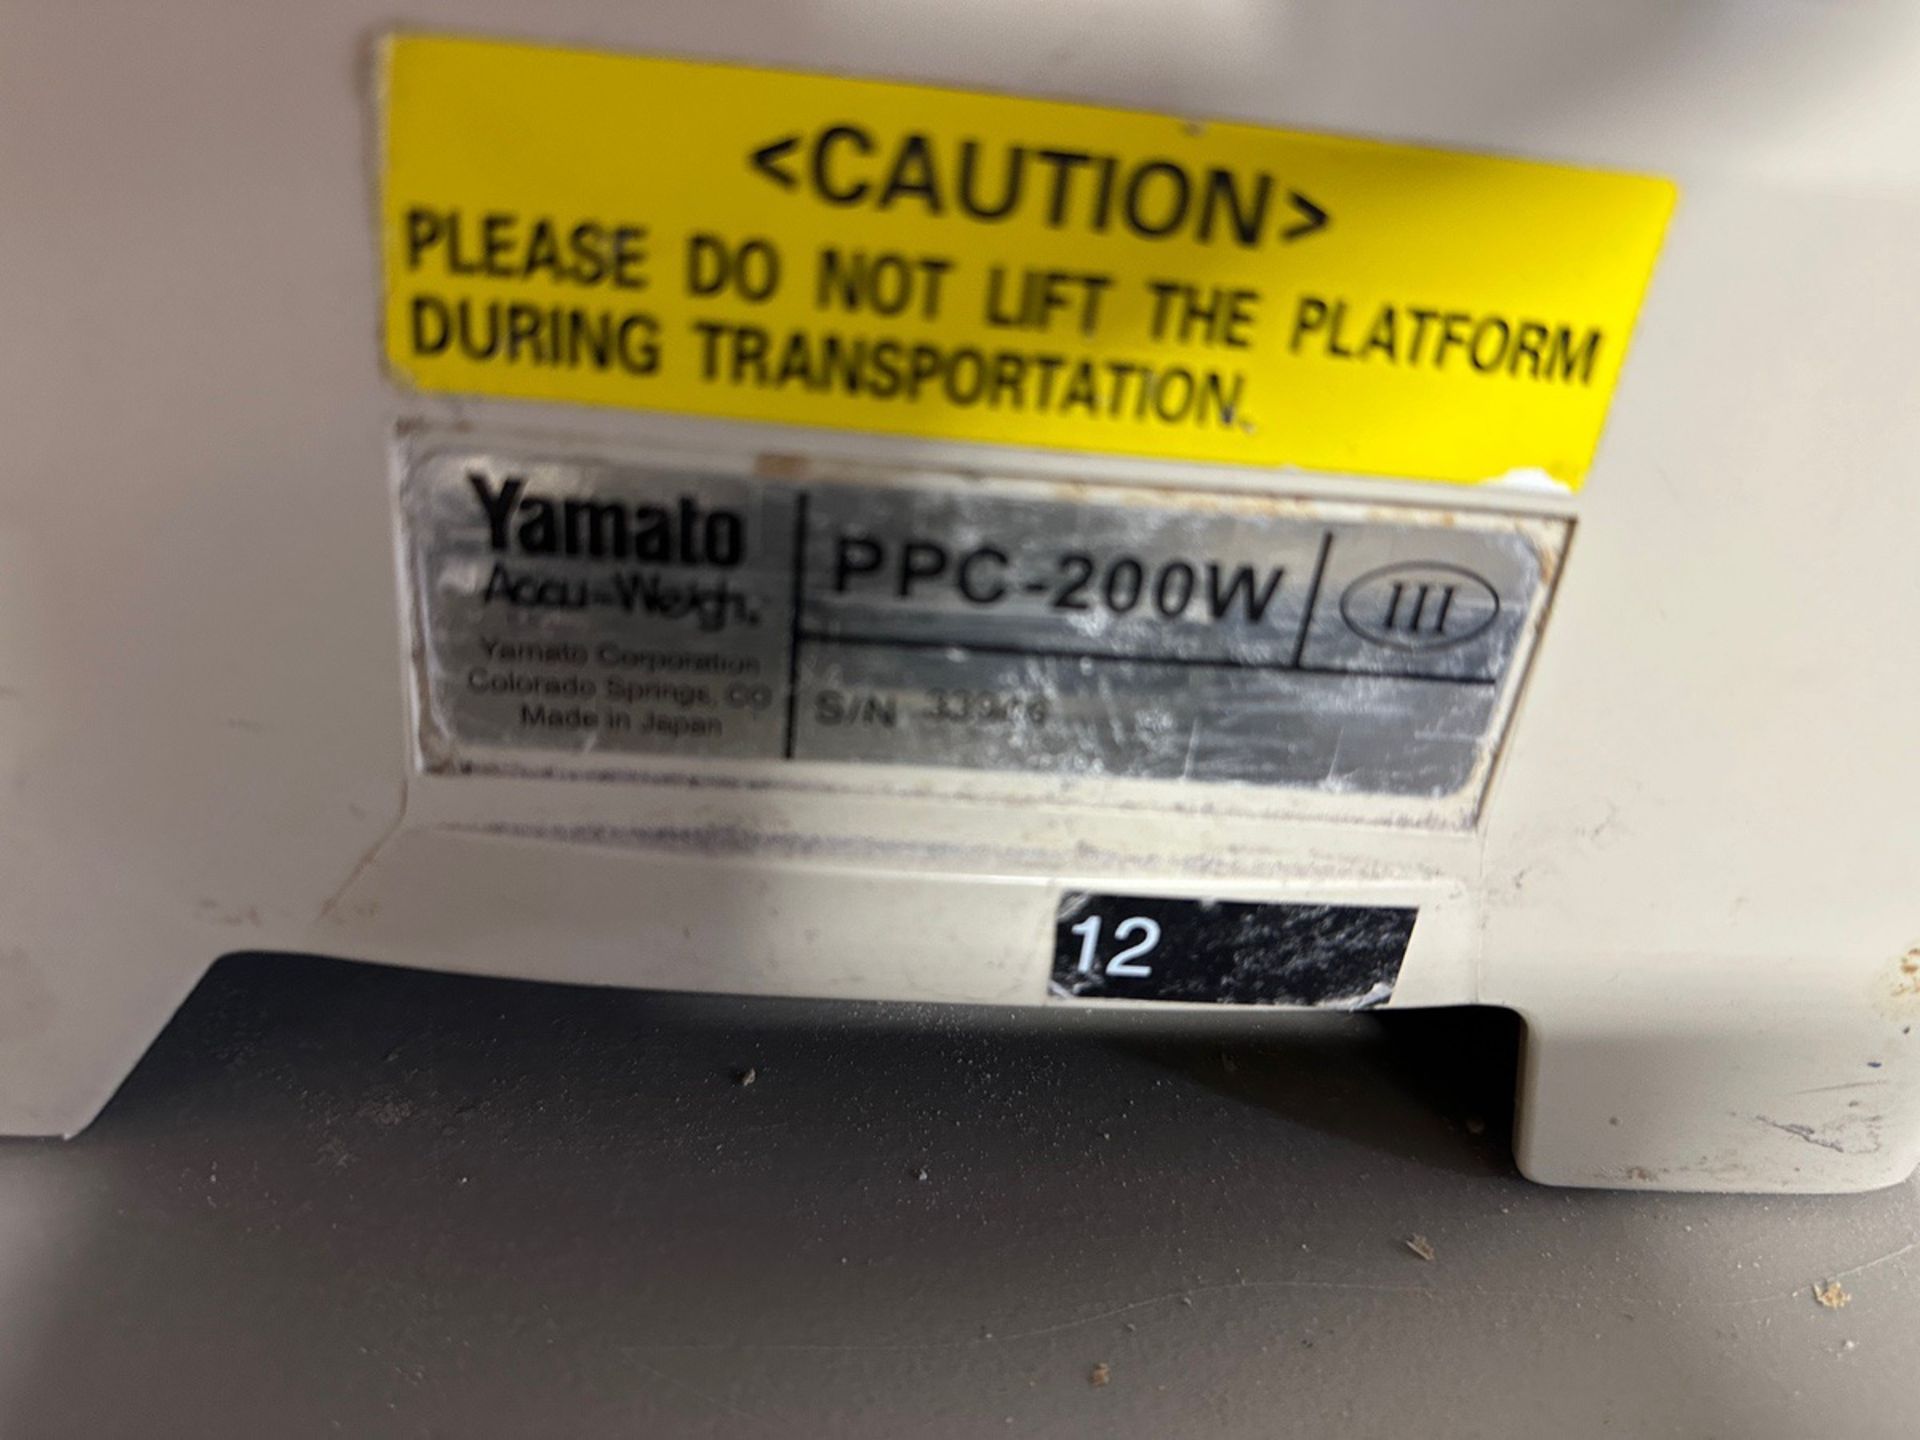 Yamato Model PPC-200W Digital Scale with 40 LB Capacity | Rig Fee $25 - Image 3 of 3